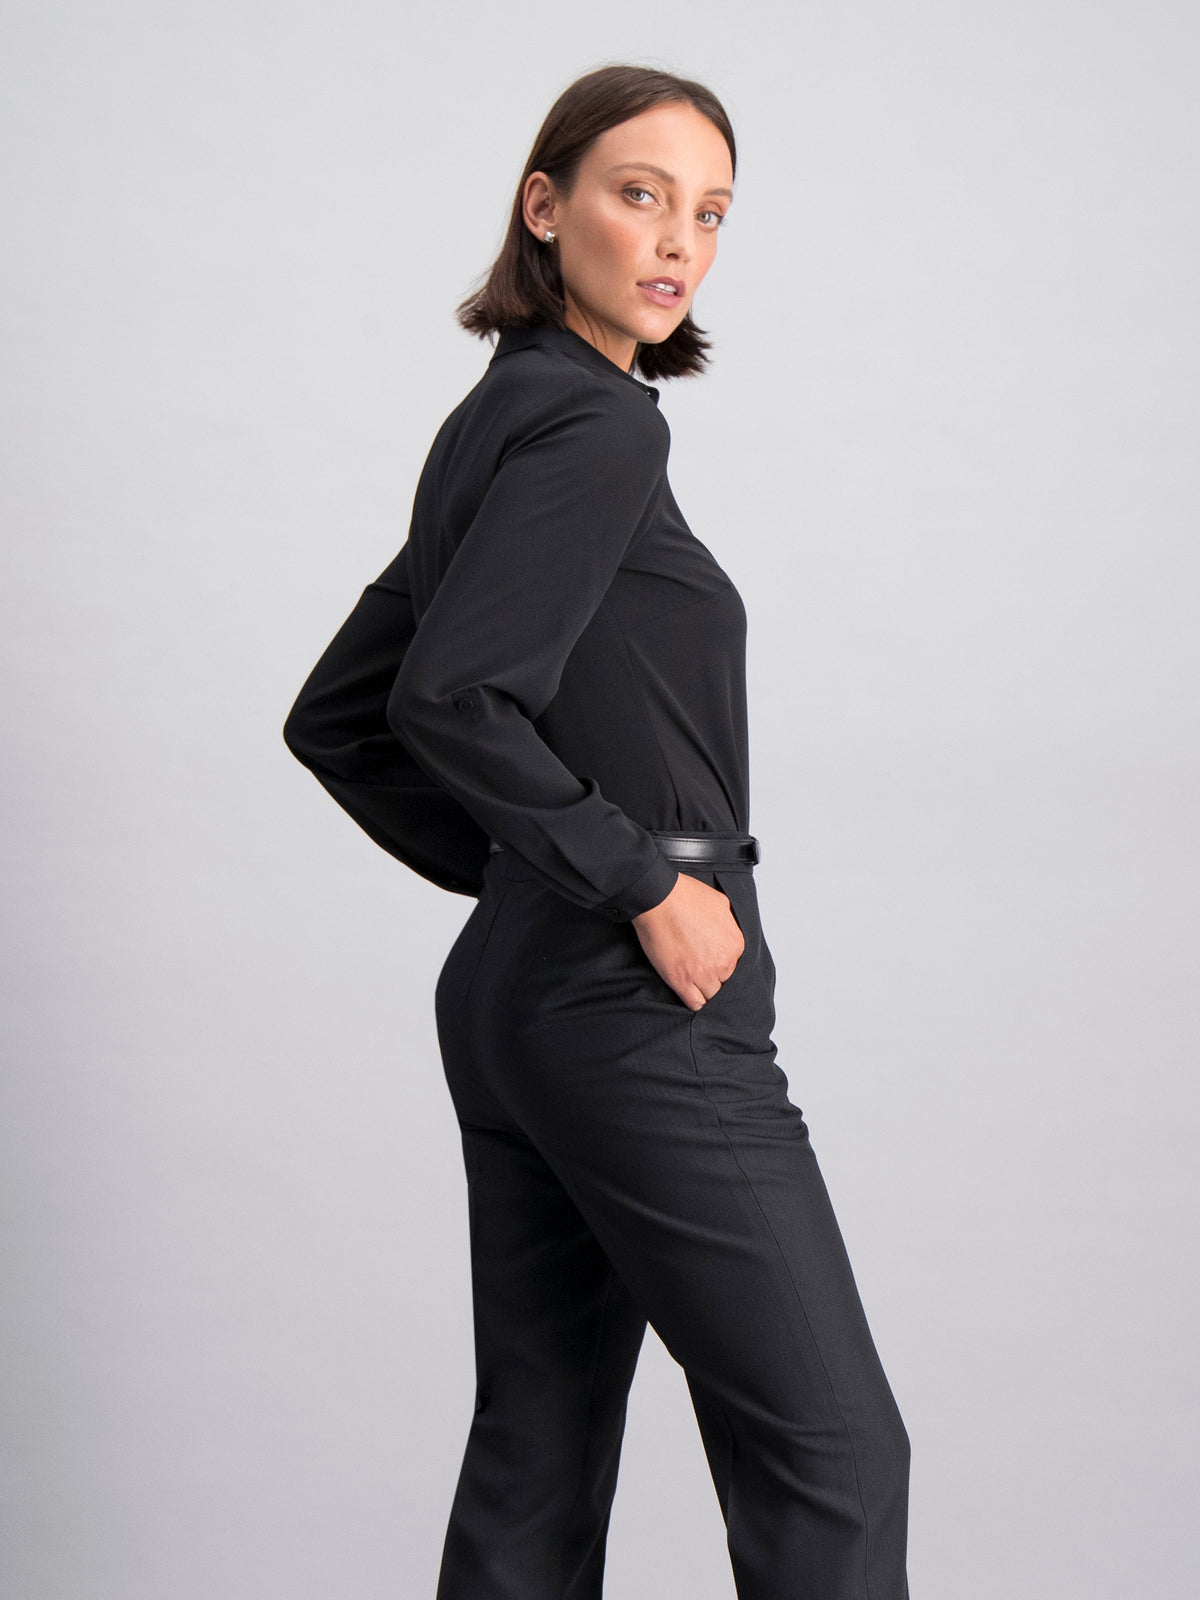 Cathy classic buttoned shirt - black